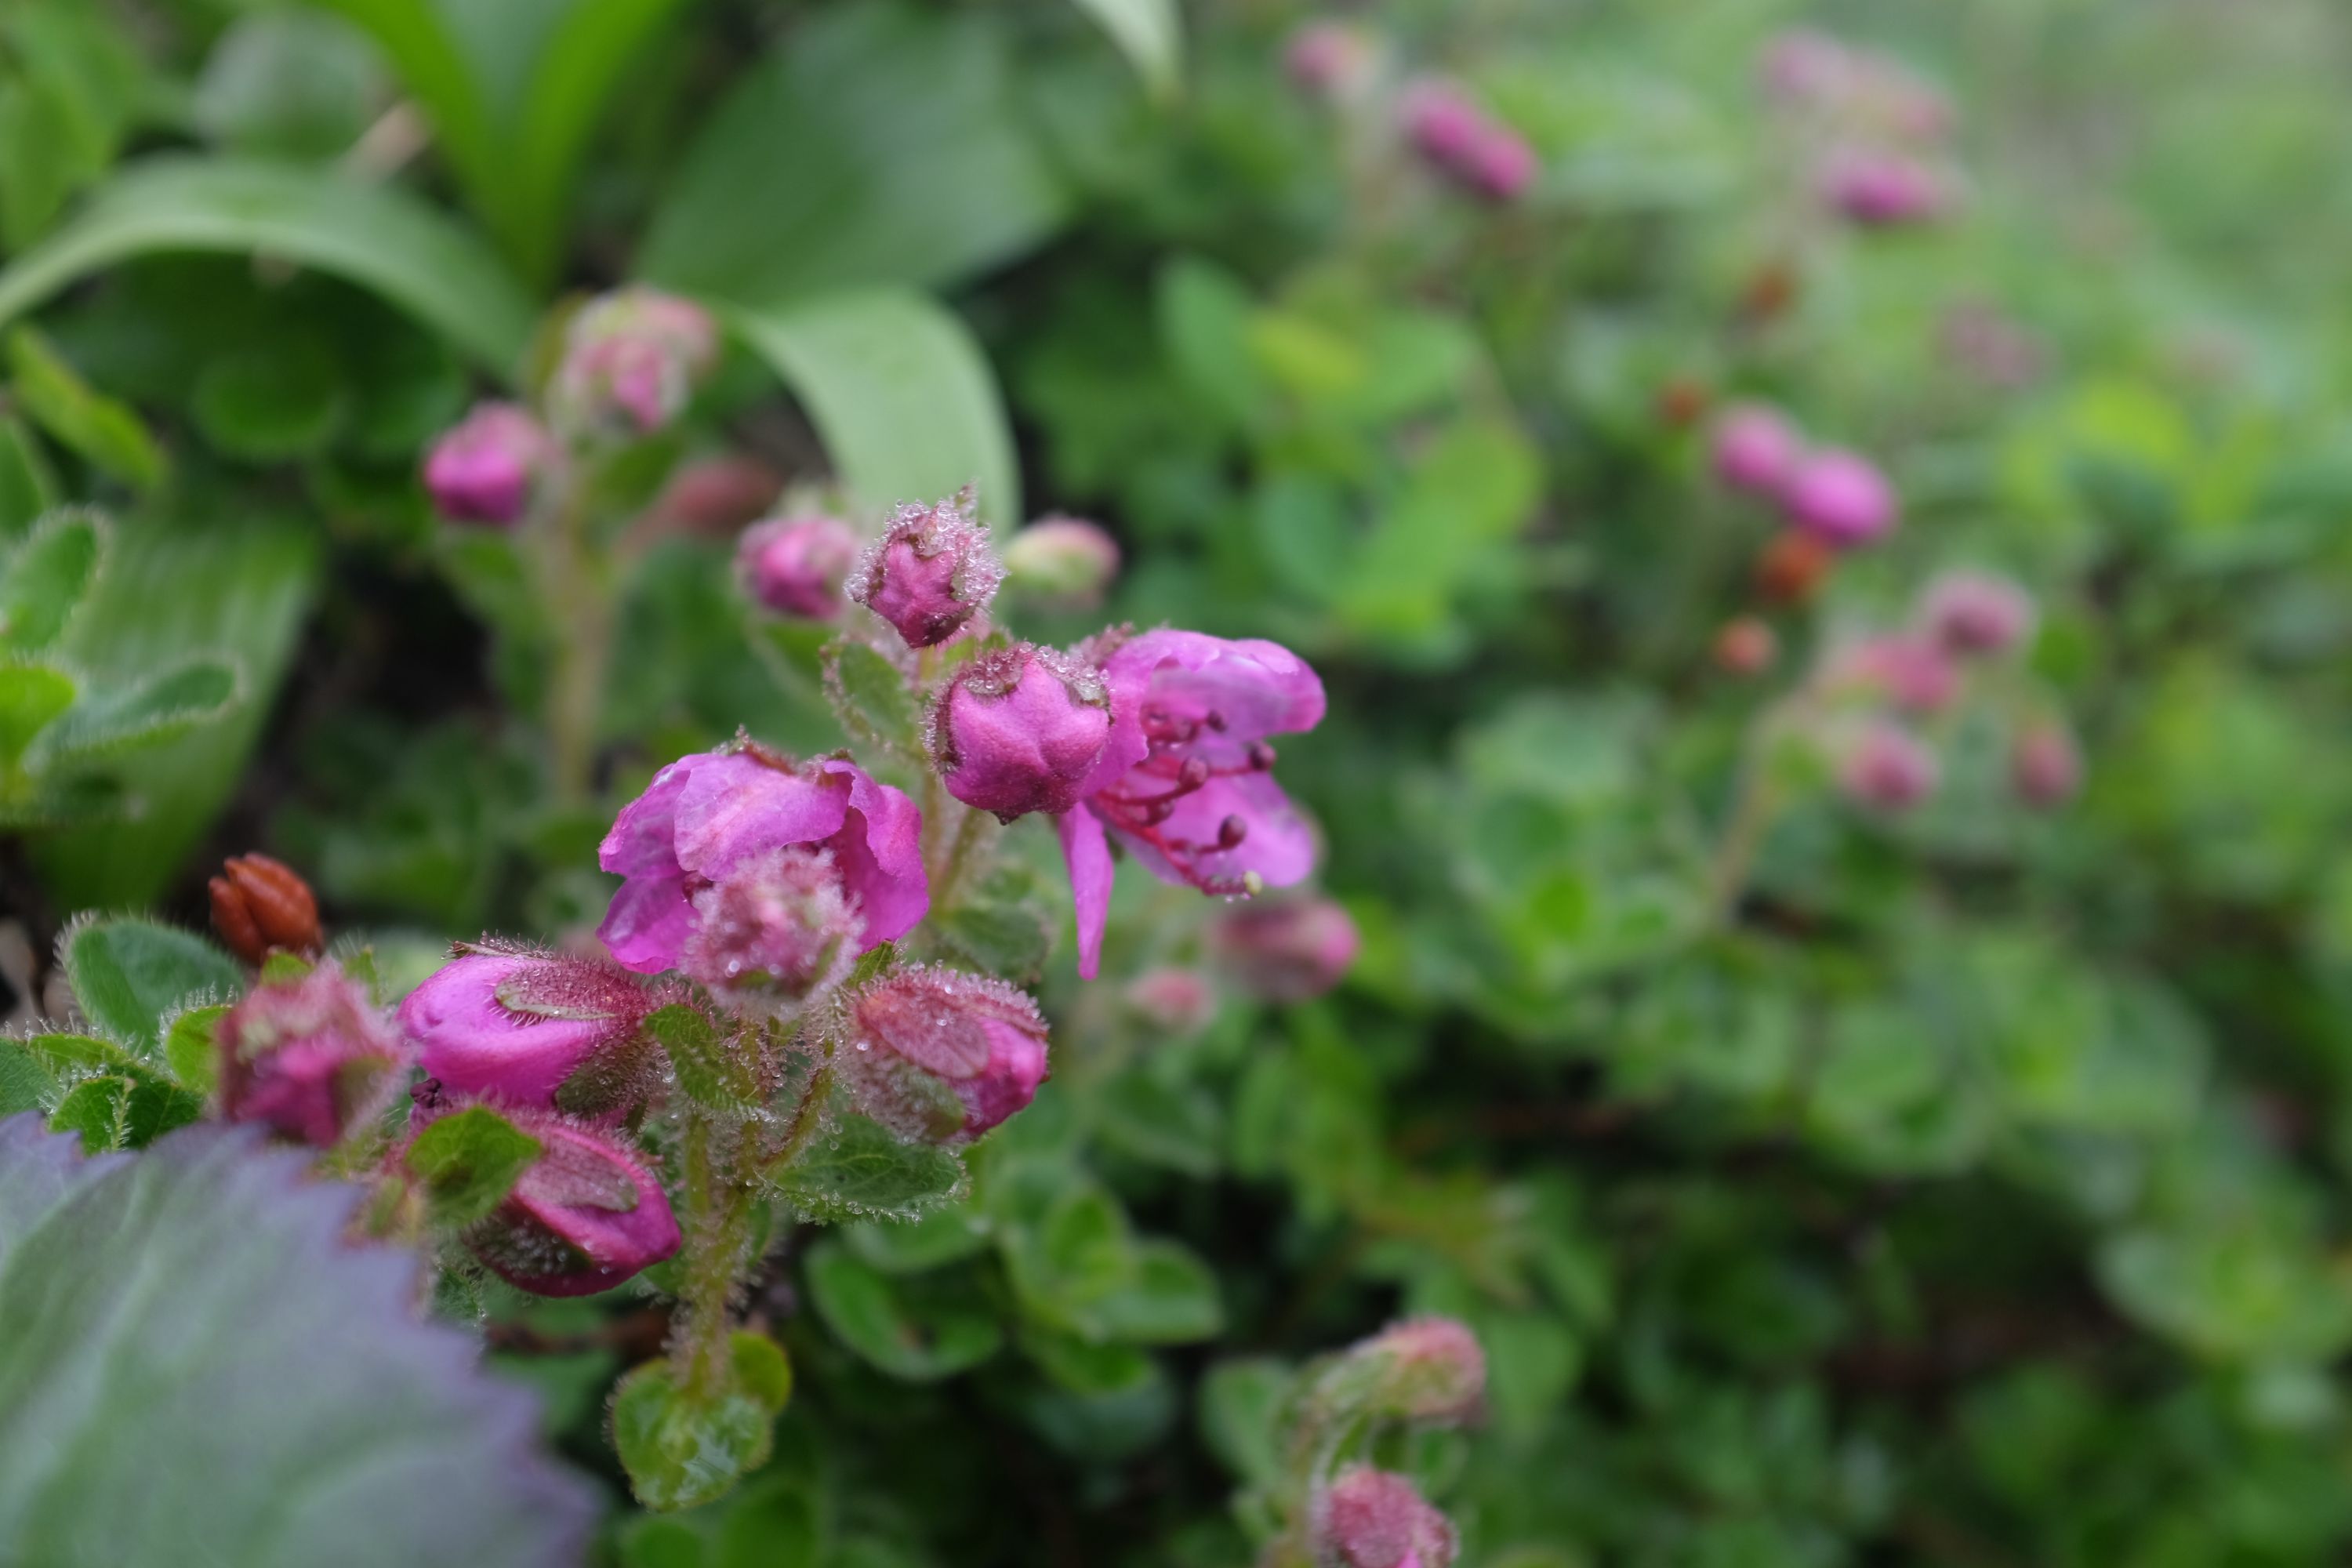 Tiny pink roses covered in morning dew.